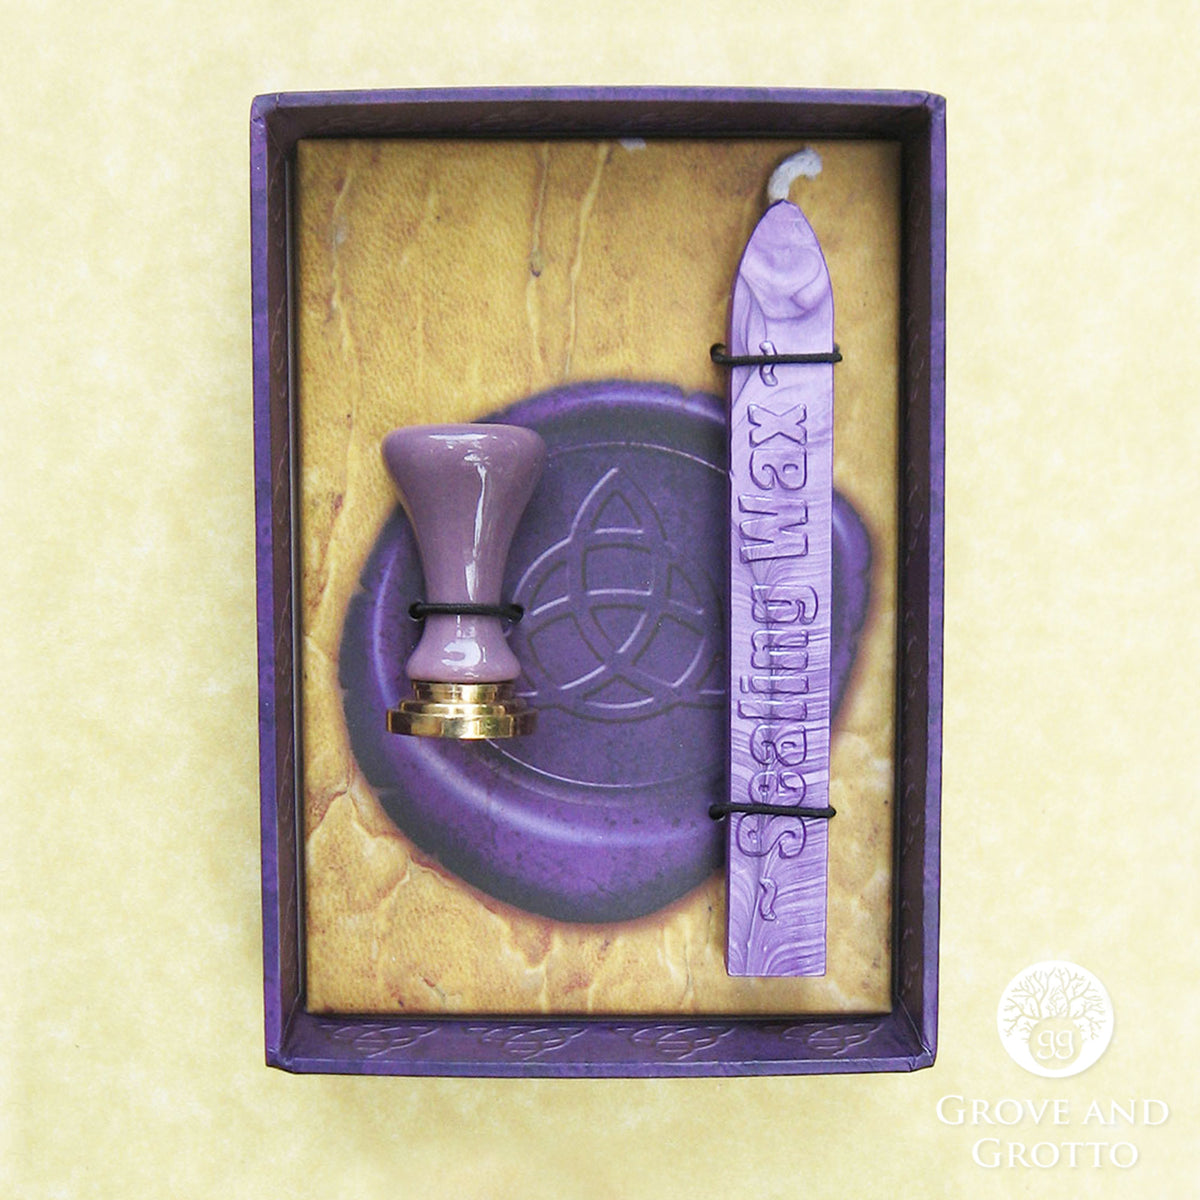 Sage Goddess Traditional Sealing Wax Stick for old-fashioned beauty